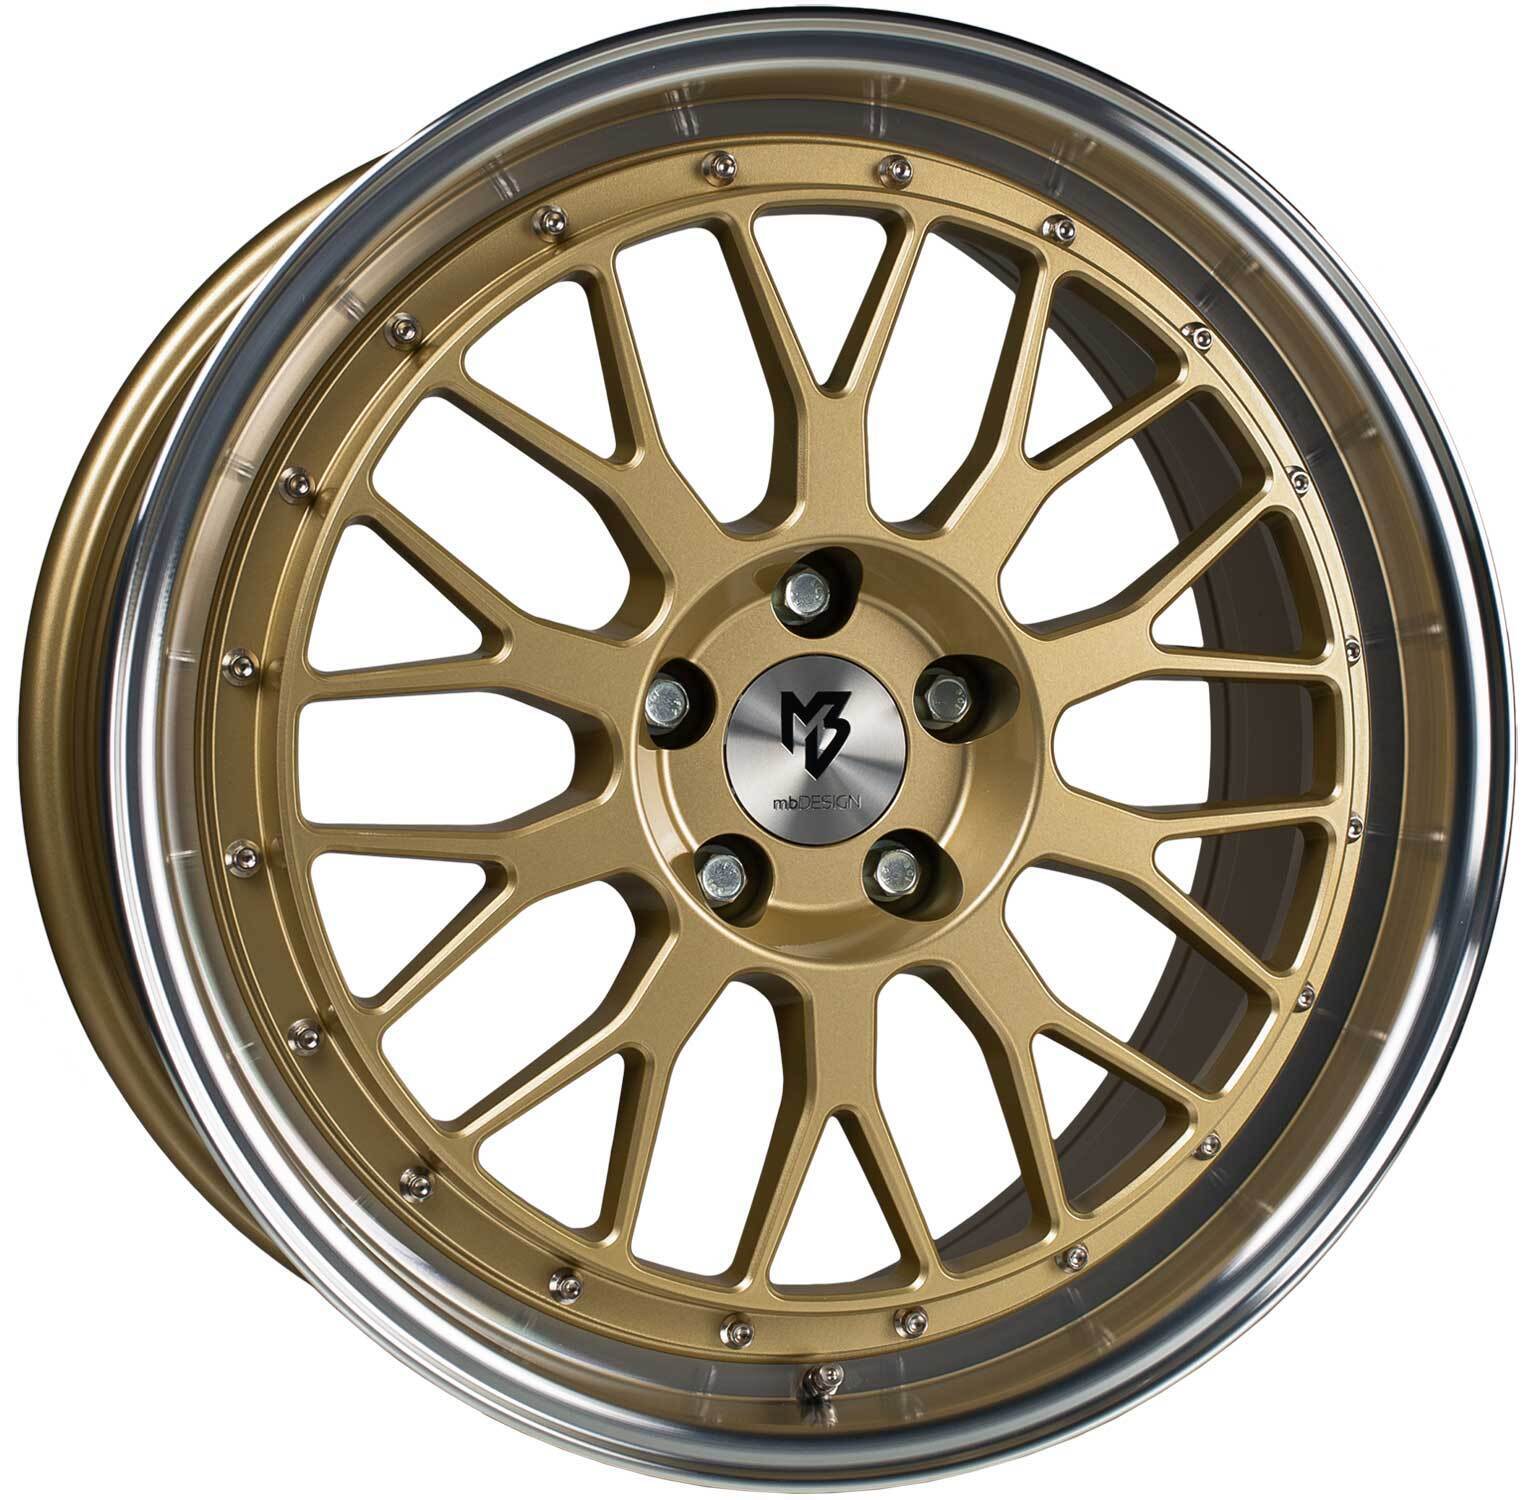 MB Design Rims LV1 8.5Jx20 ET45 5x108 GOLD POLISHED for Land Rover Discovery Spo